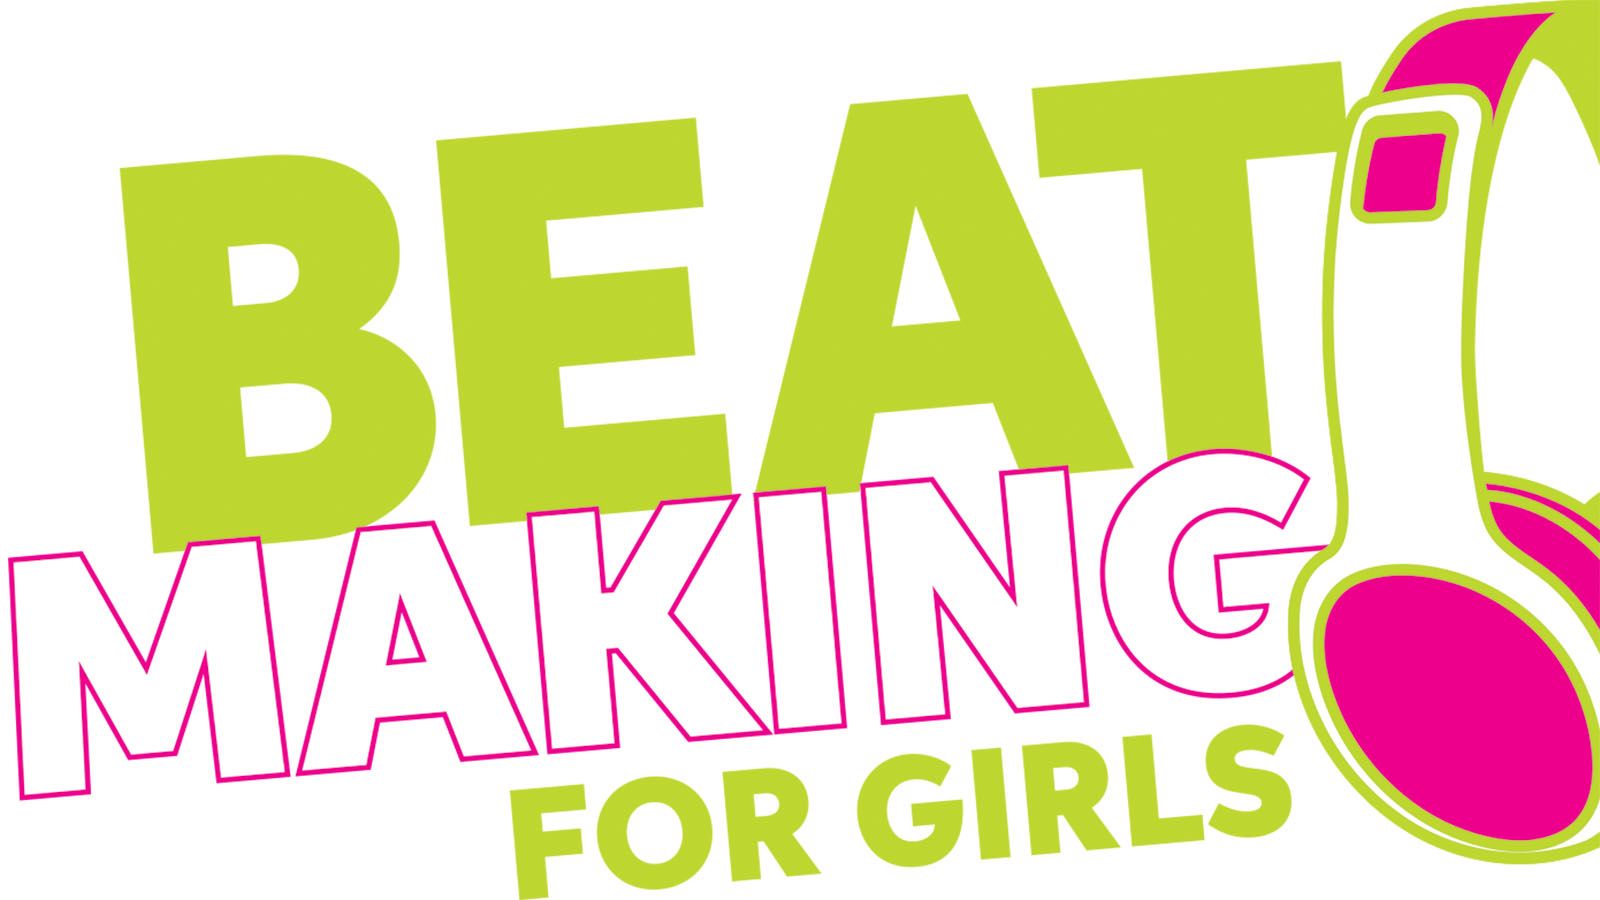 Sweetwater Academy offers Beat Making for Girls on the last Tuesday of every month.